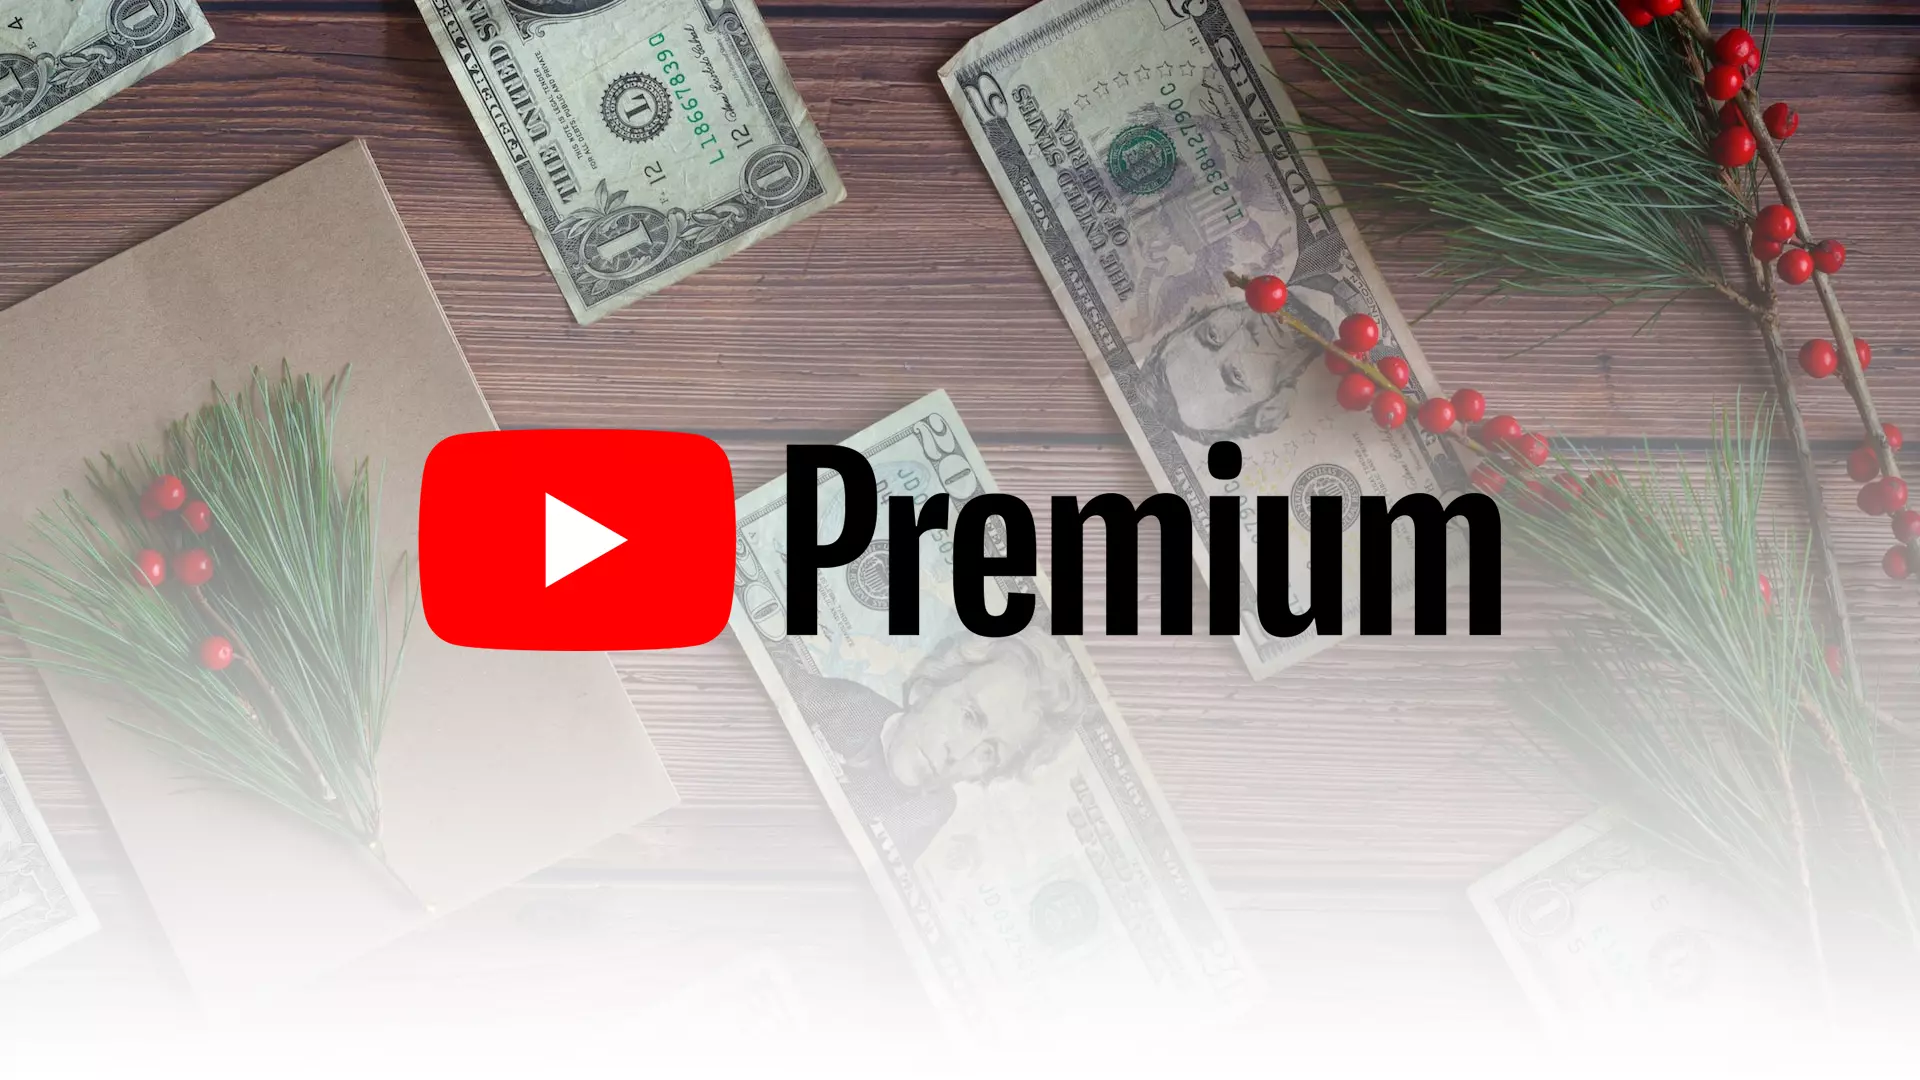 YouTube Premium family plan went up by $5